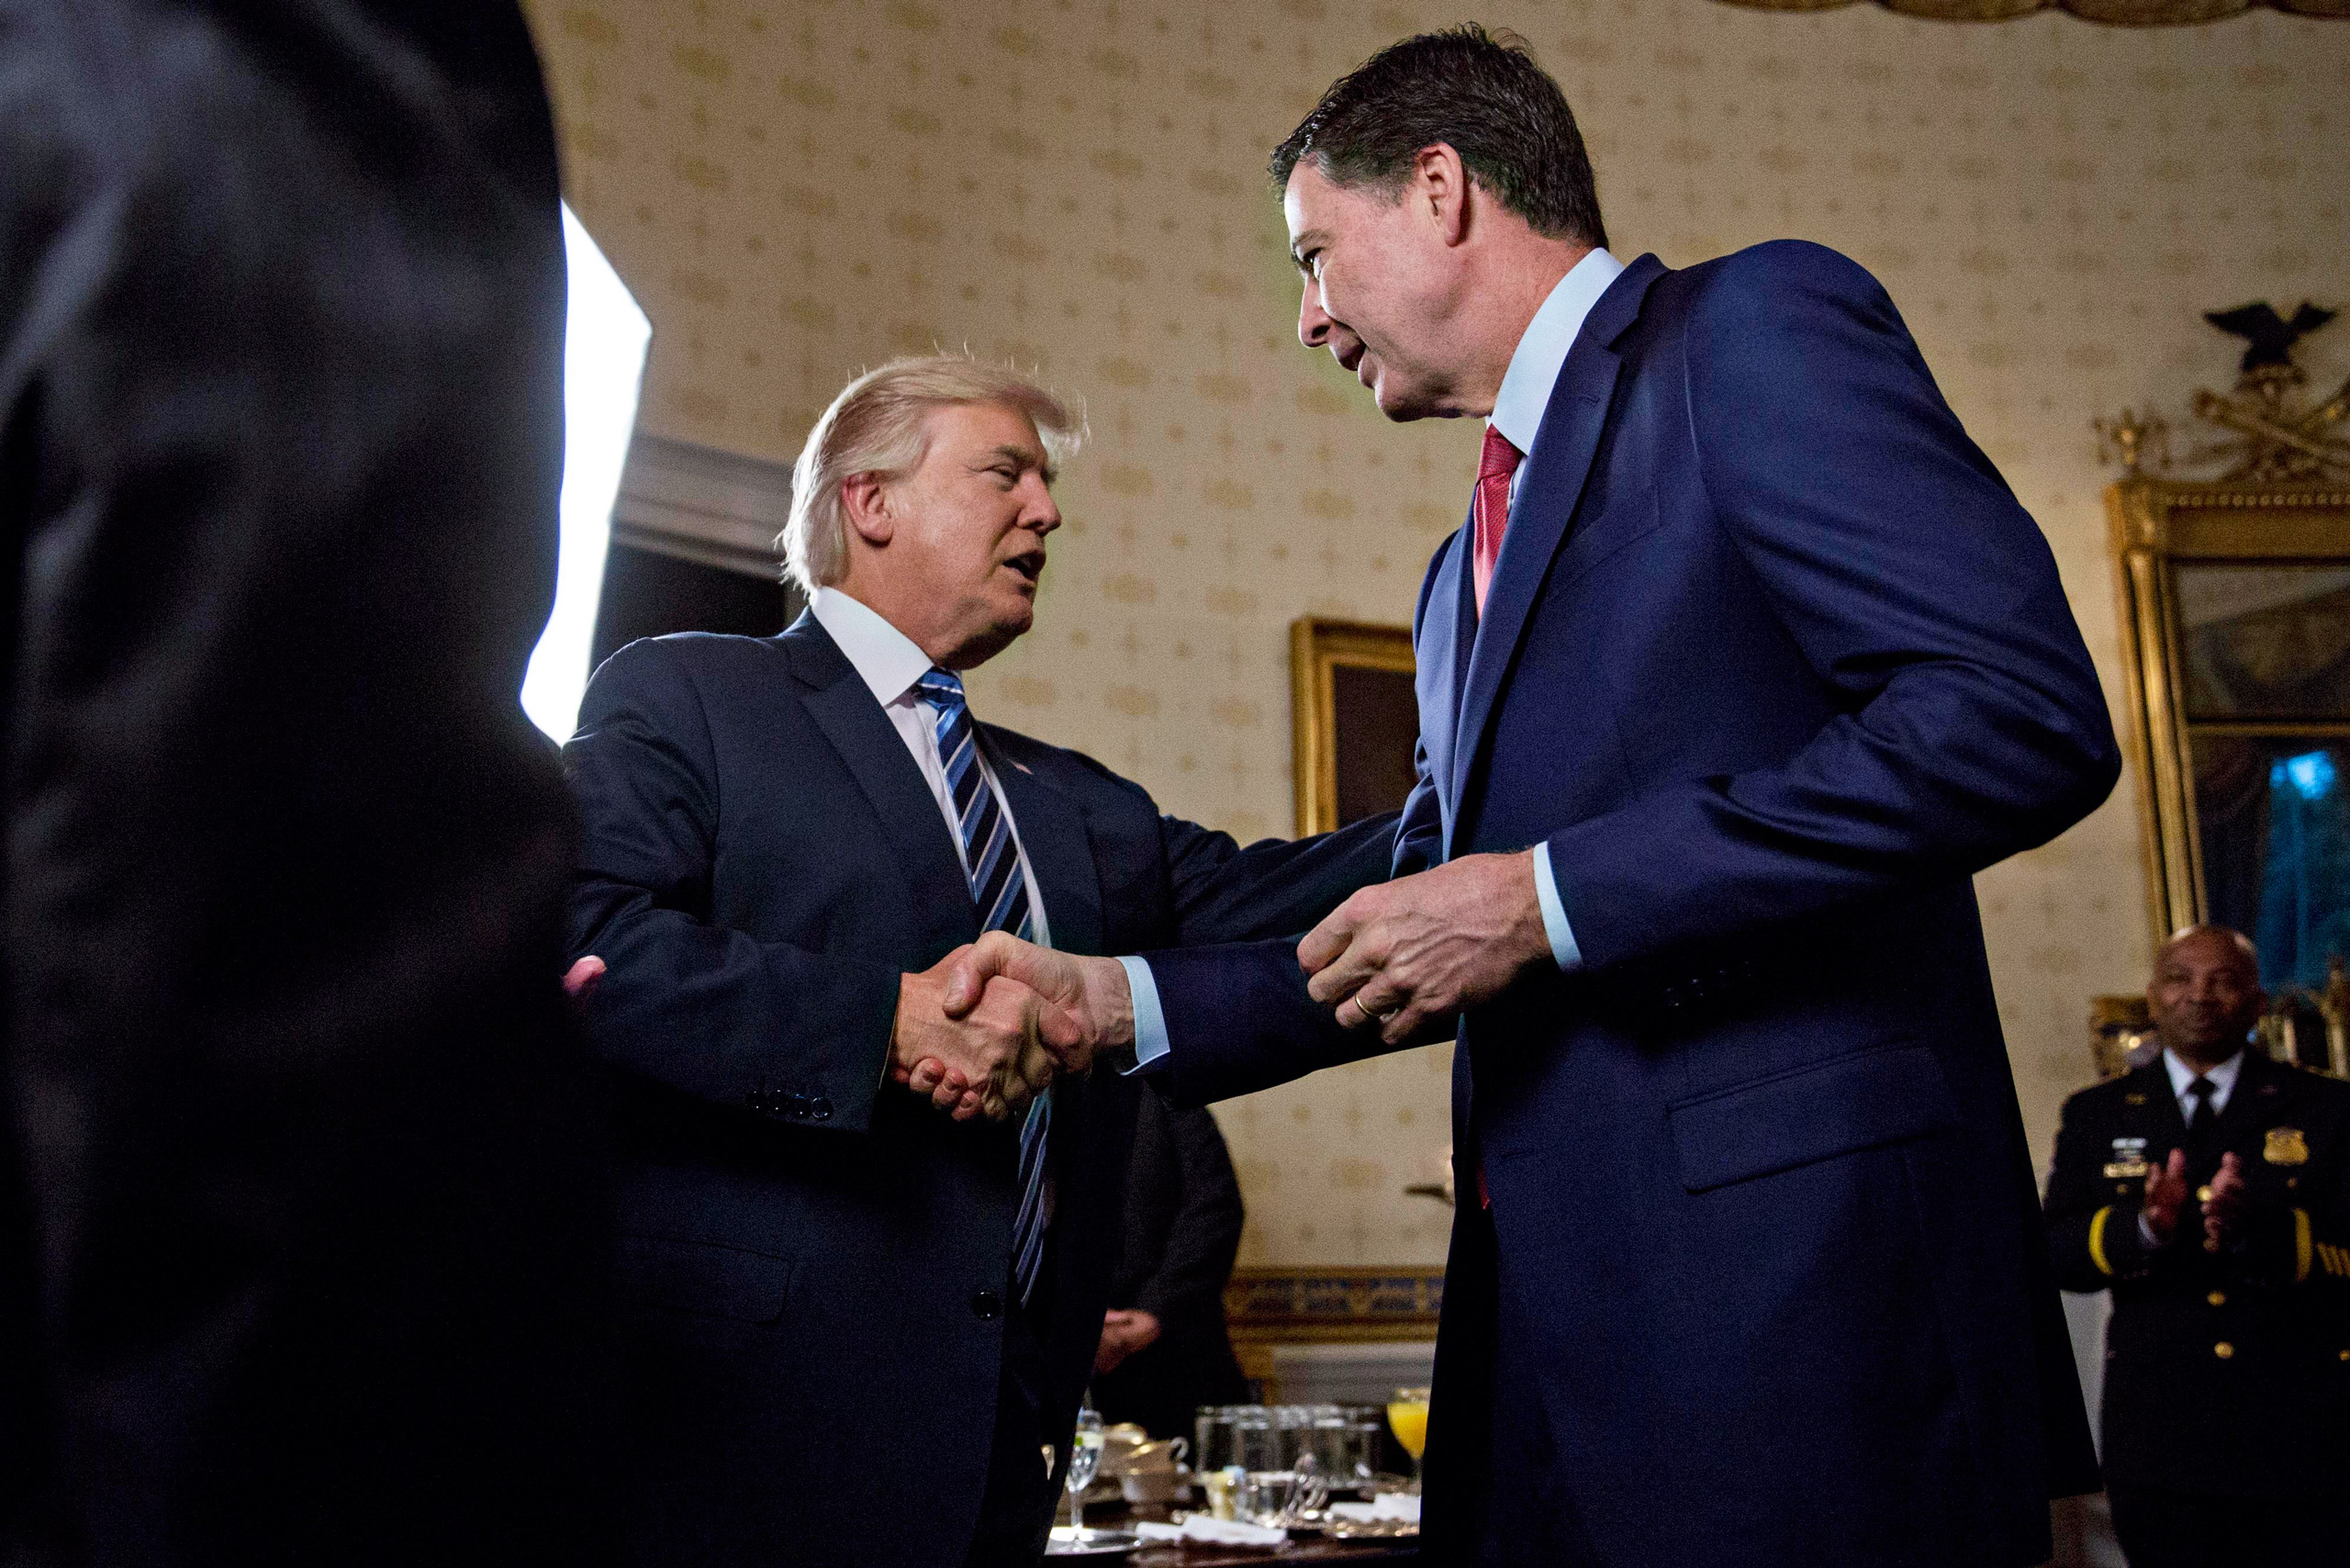 President Trump shook hands with Comey during an Inaugural reception at the White House in January (Andrew Harrer—Picture-Alliance/DPA/AP)